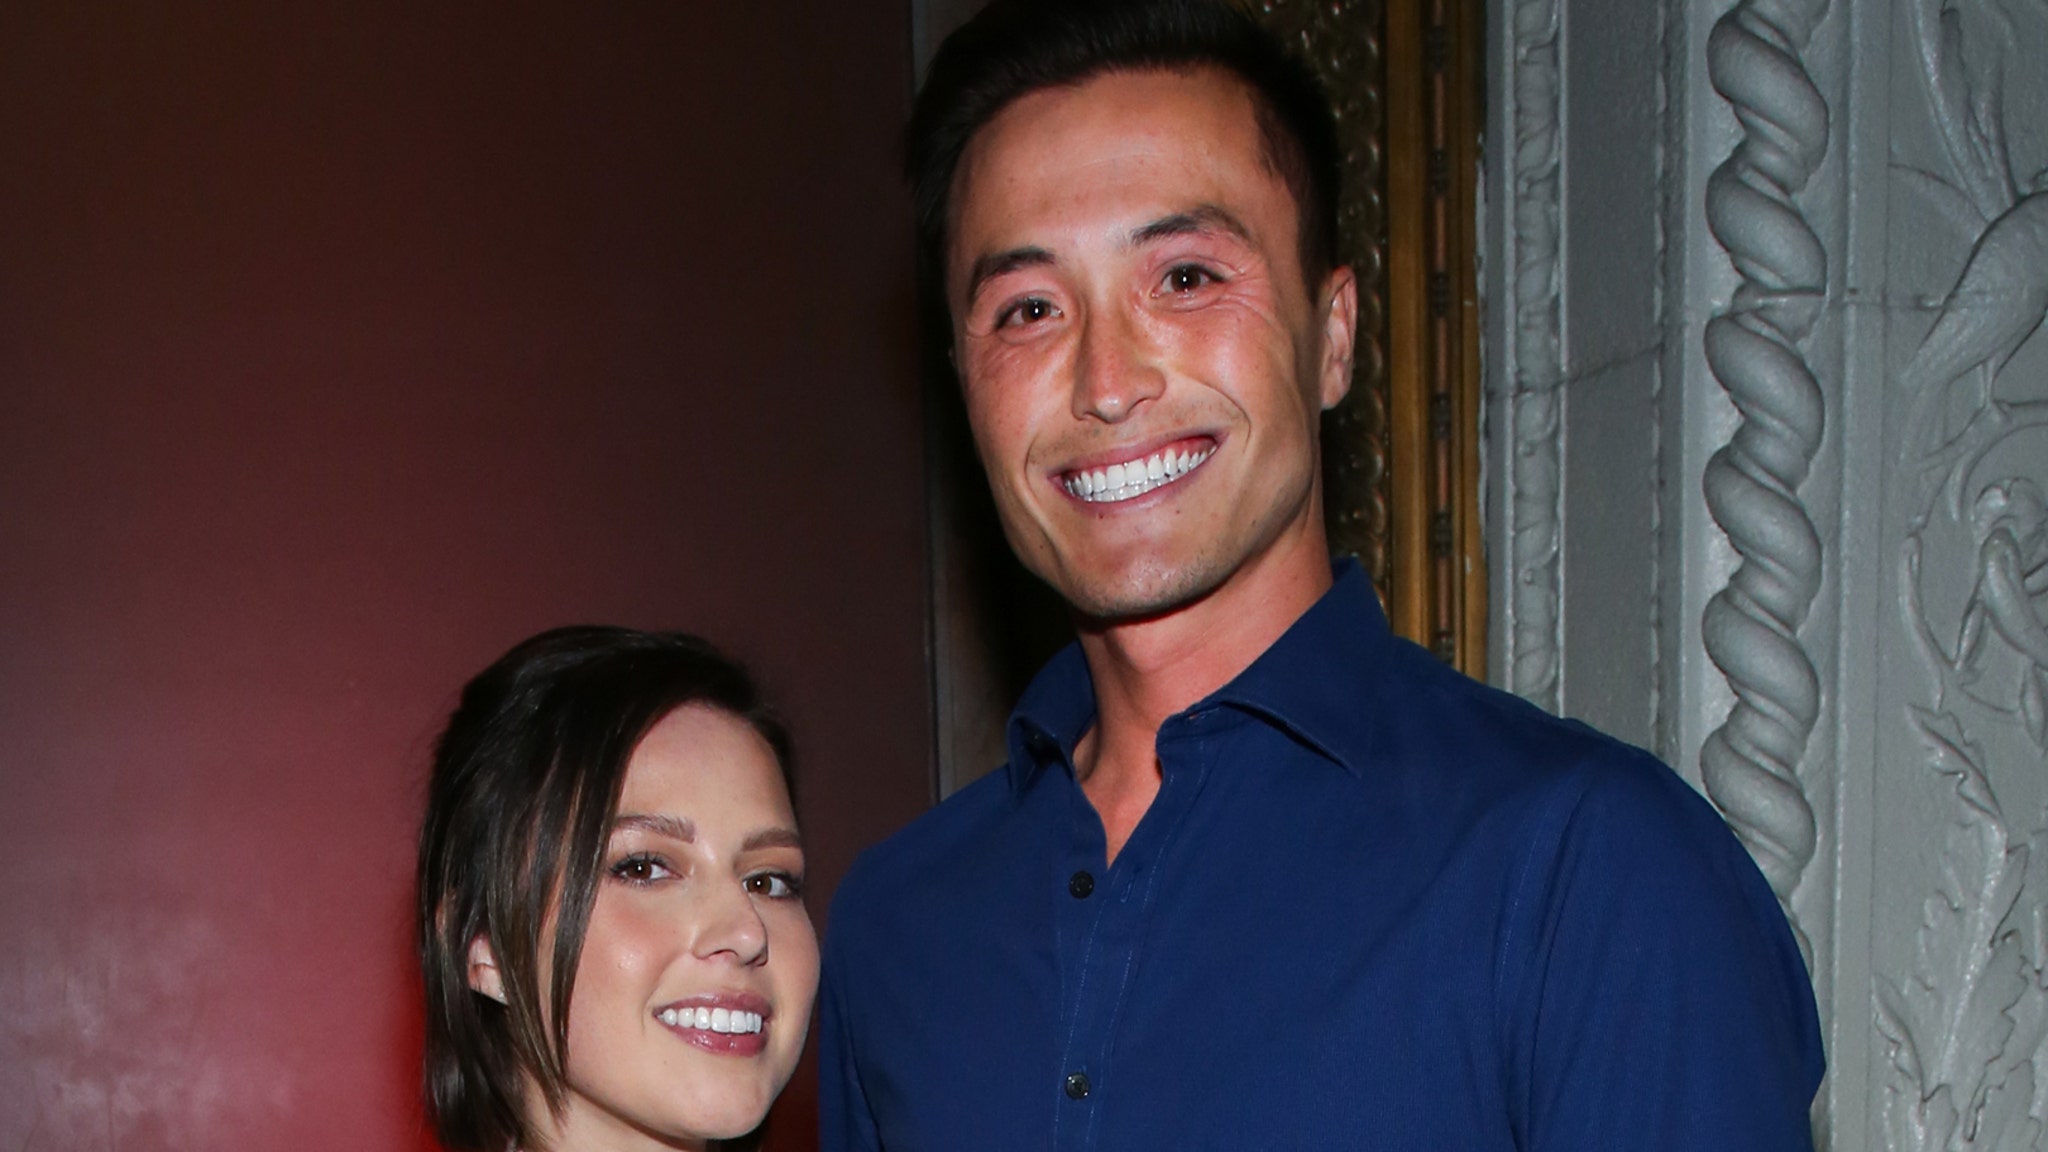 Bachelorette Stars Katie Thurston and John Hersey Call it Quits: 'No We Aren't Together'